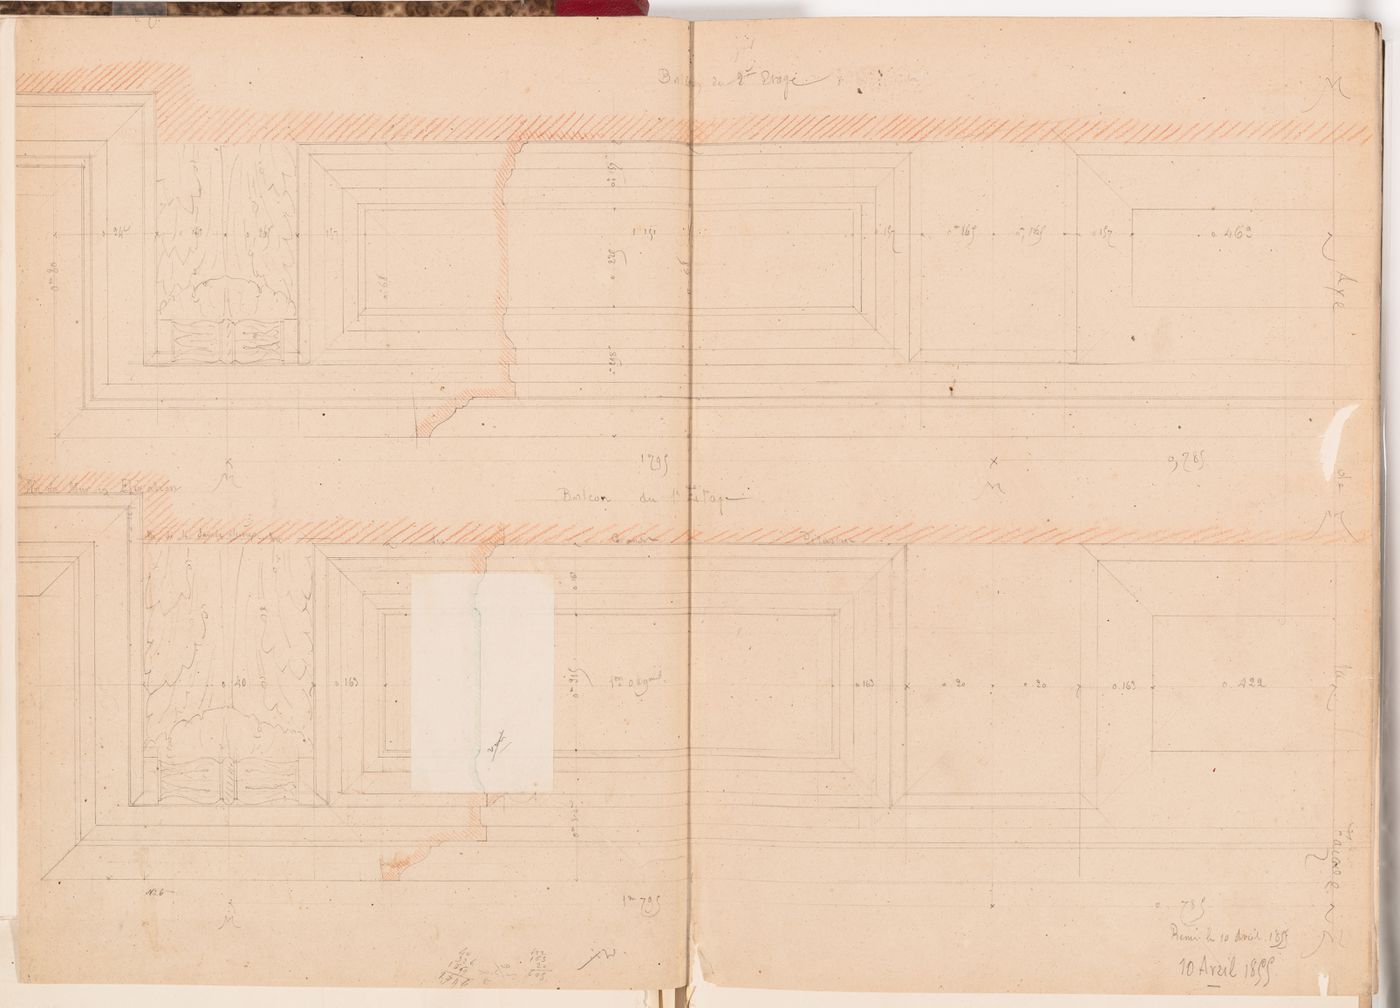 Reflected ceiling plan with profiles for the first floor and second floor balconies, Hôtel Soltykoff